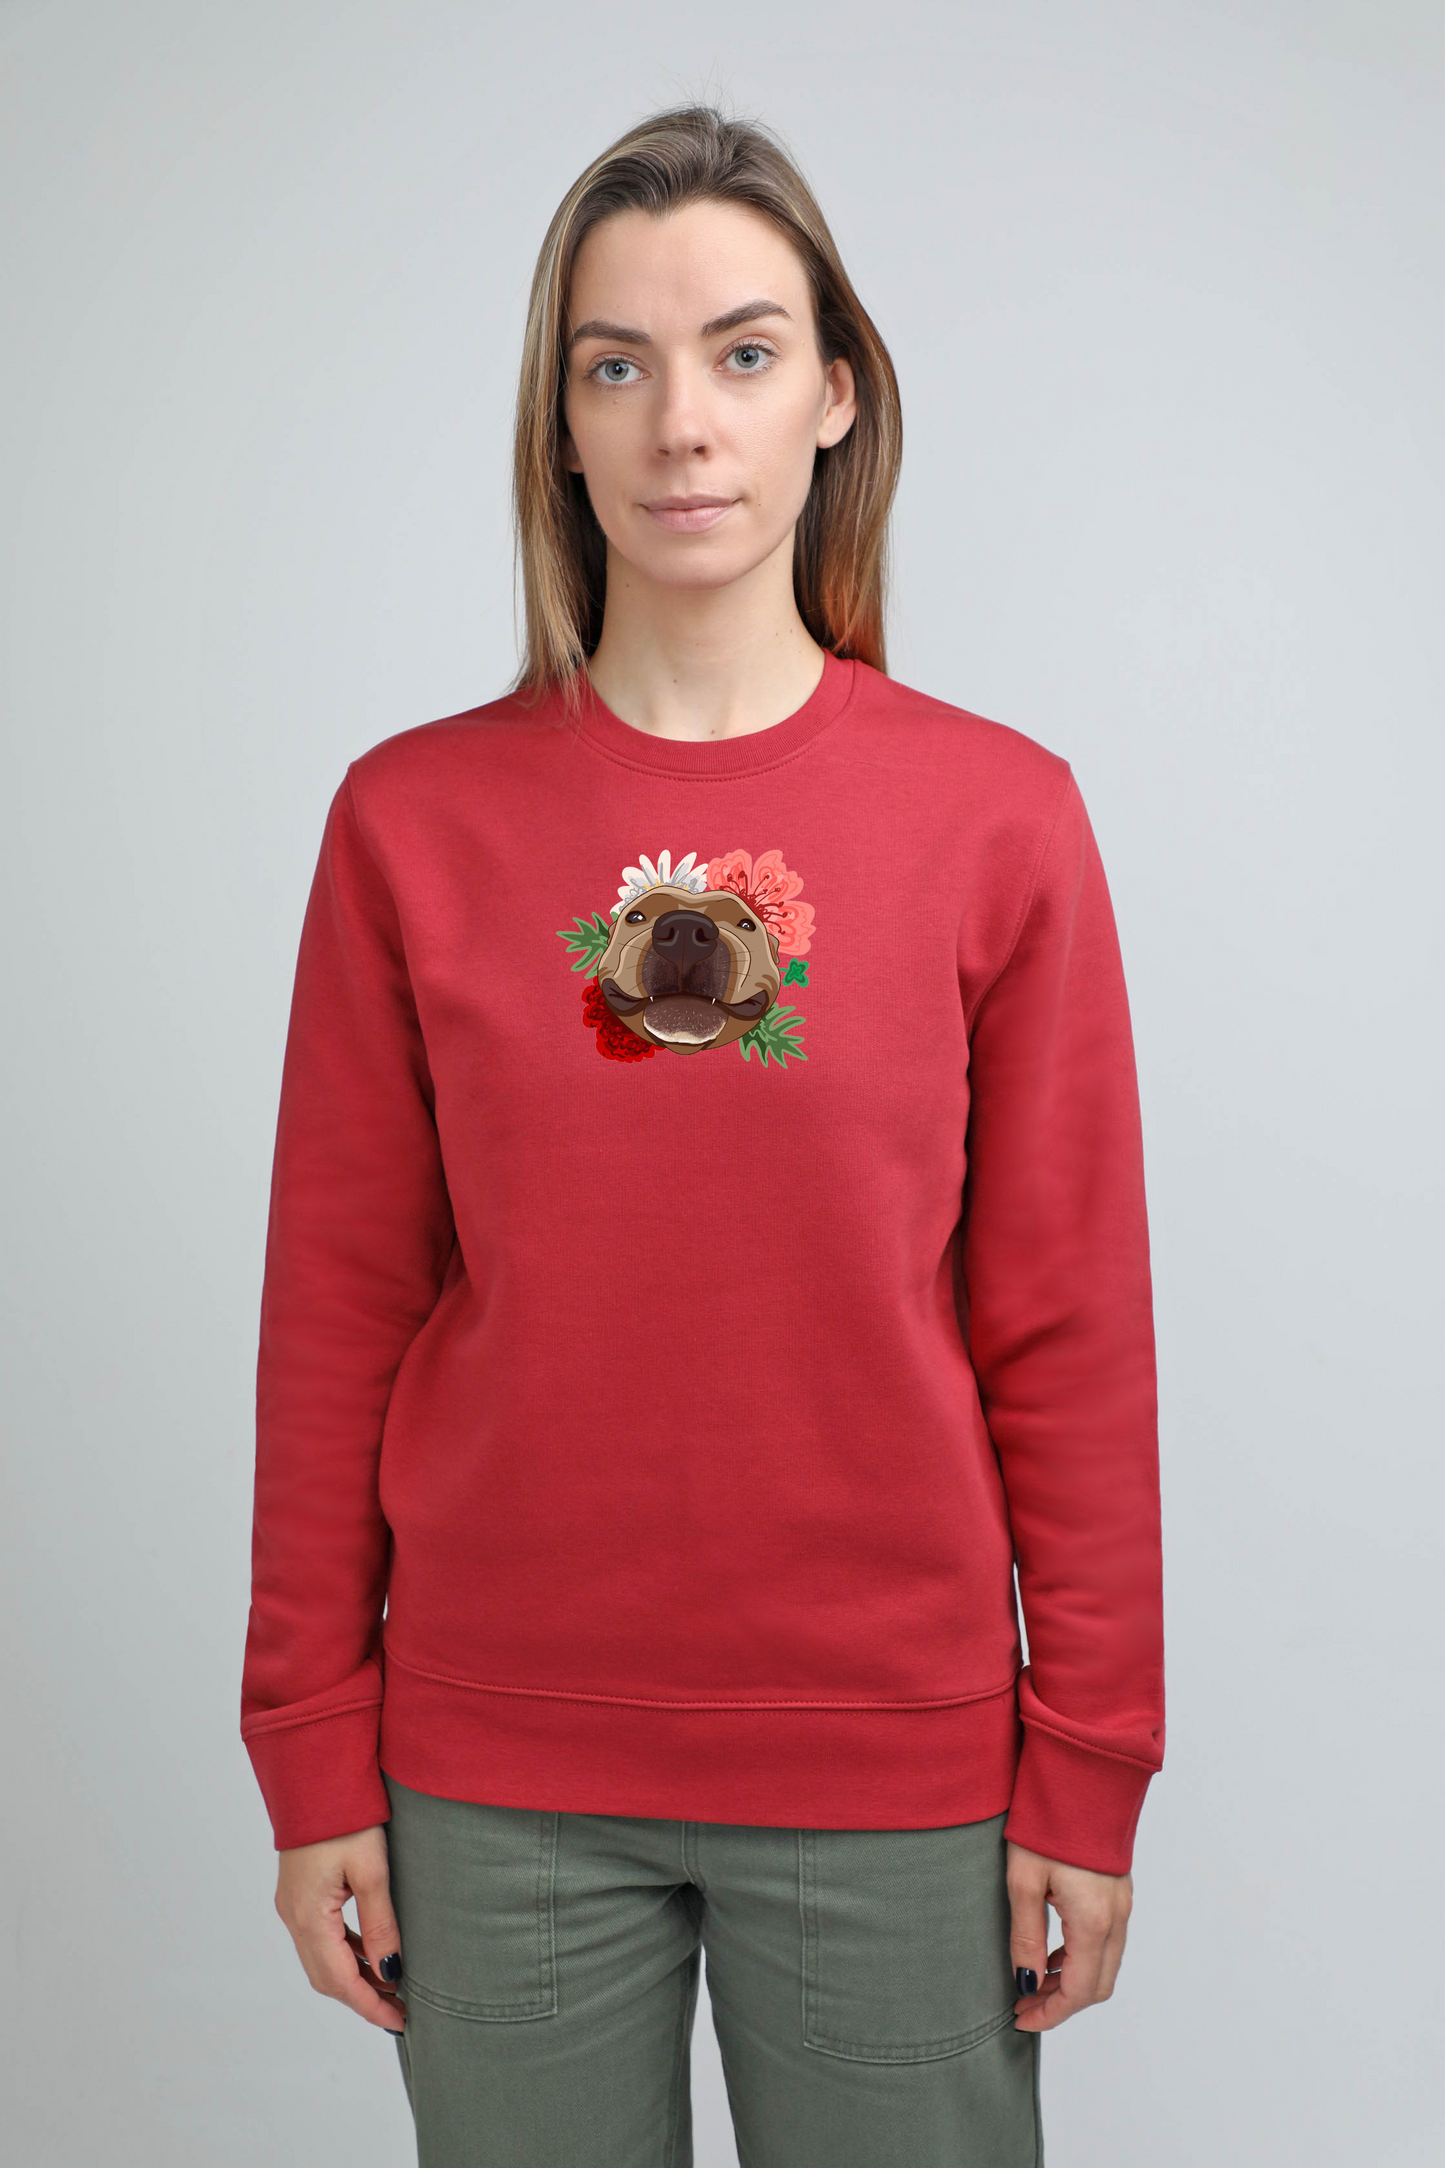 Serious dog with flowers | Crew neck sweatshirt with dog. Regular fit | Unisex by My Wild Other